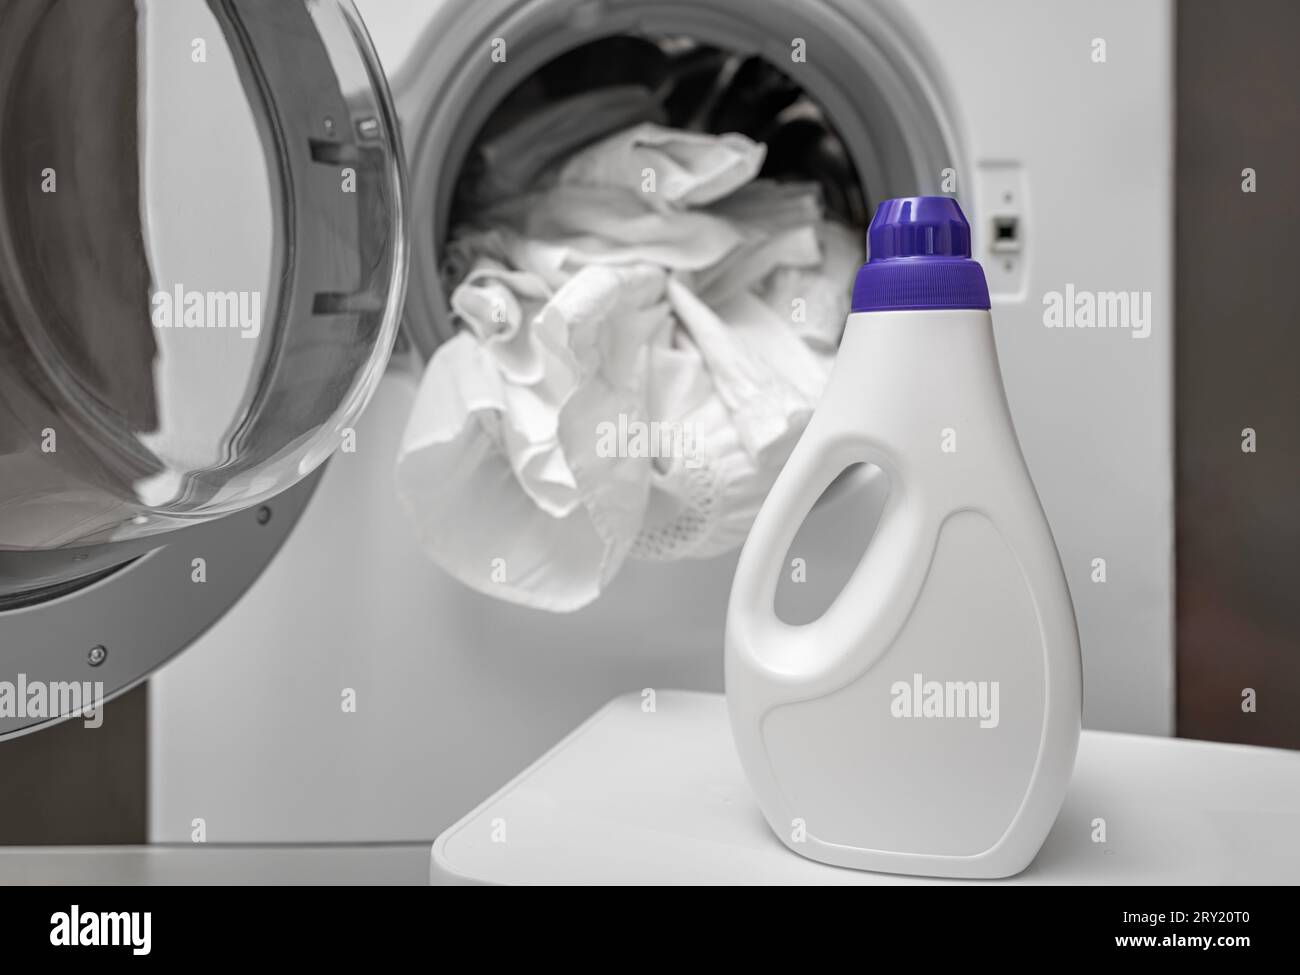 Detergent for washing white clothes. Stock Photo